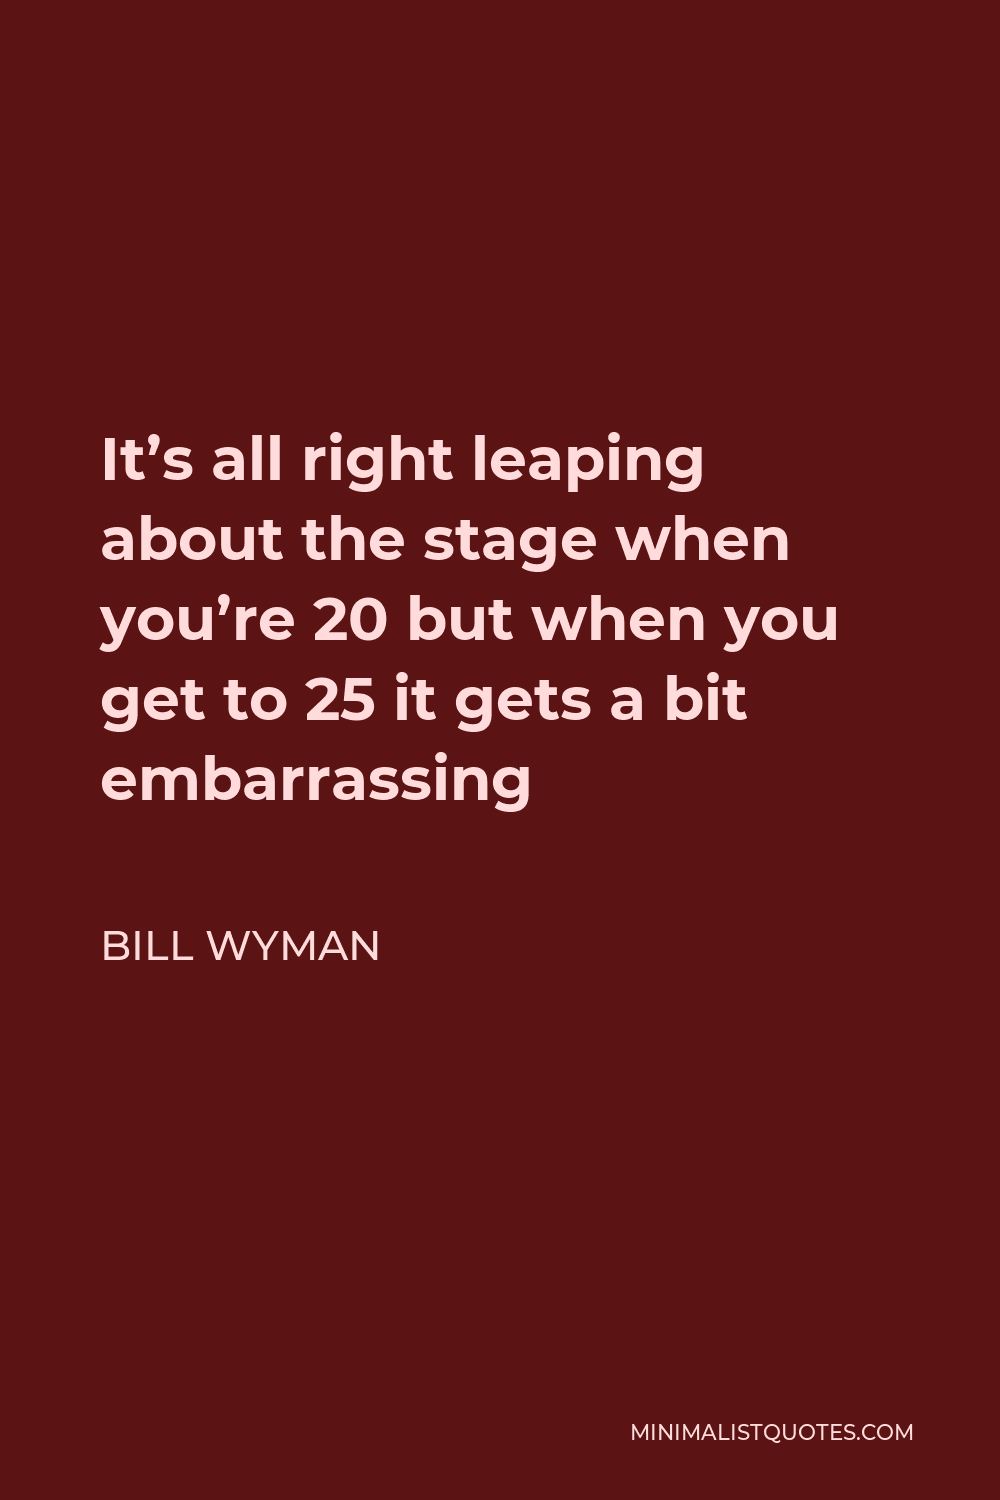 Bill Wyman Quote - It’s all right leaping about the stage when you’re 20 but when you get to 25 it gets a bit embarrassing